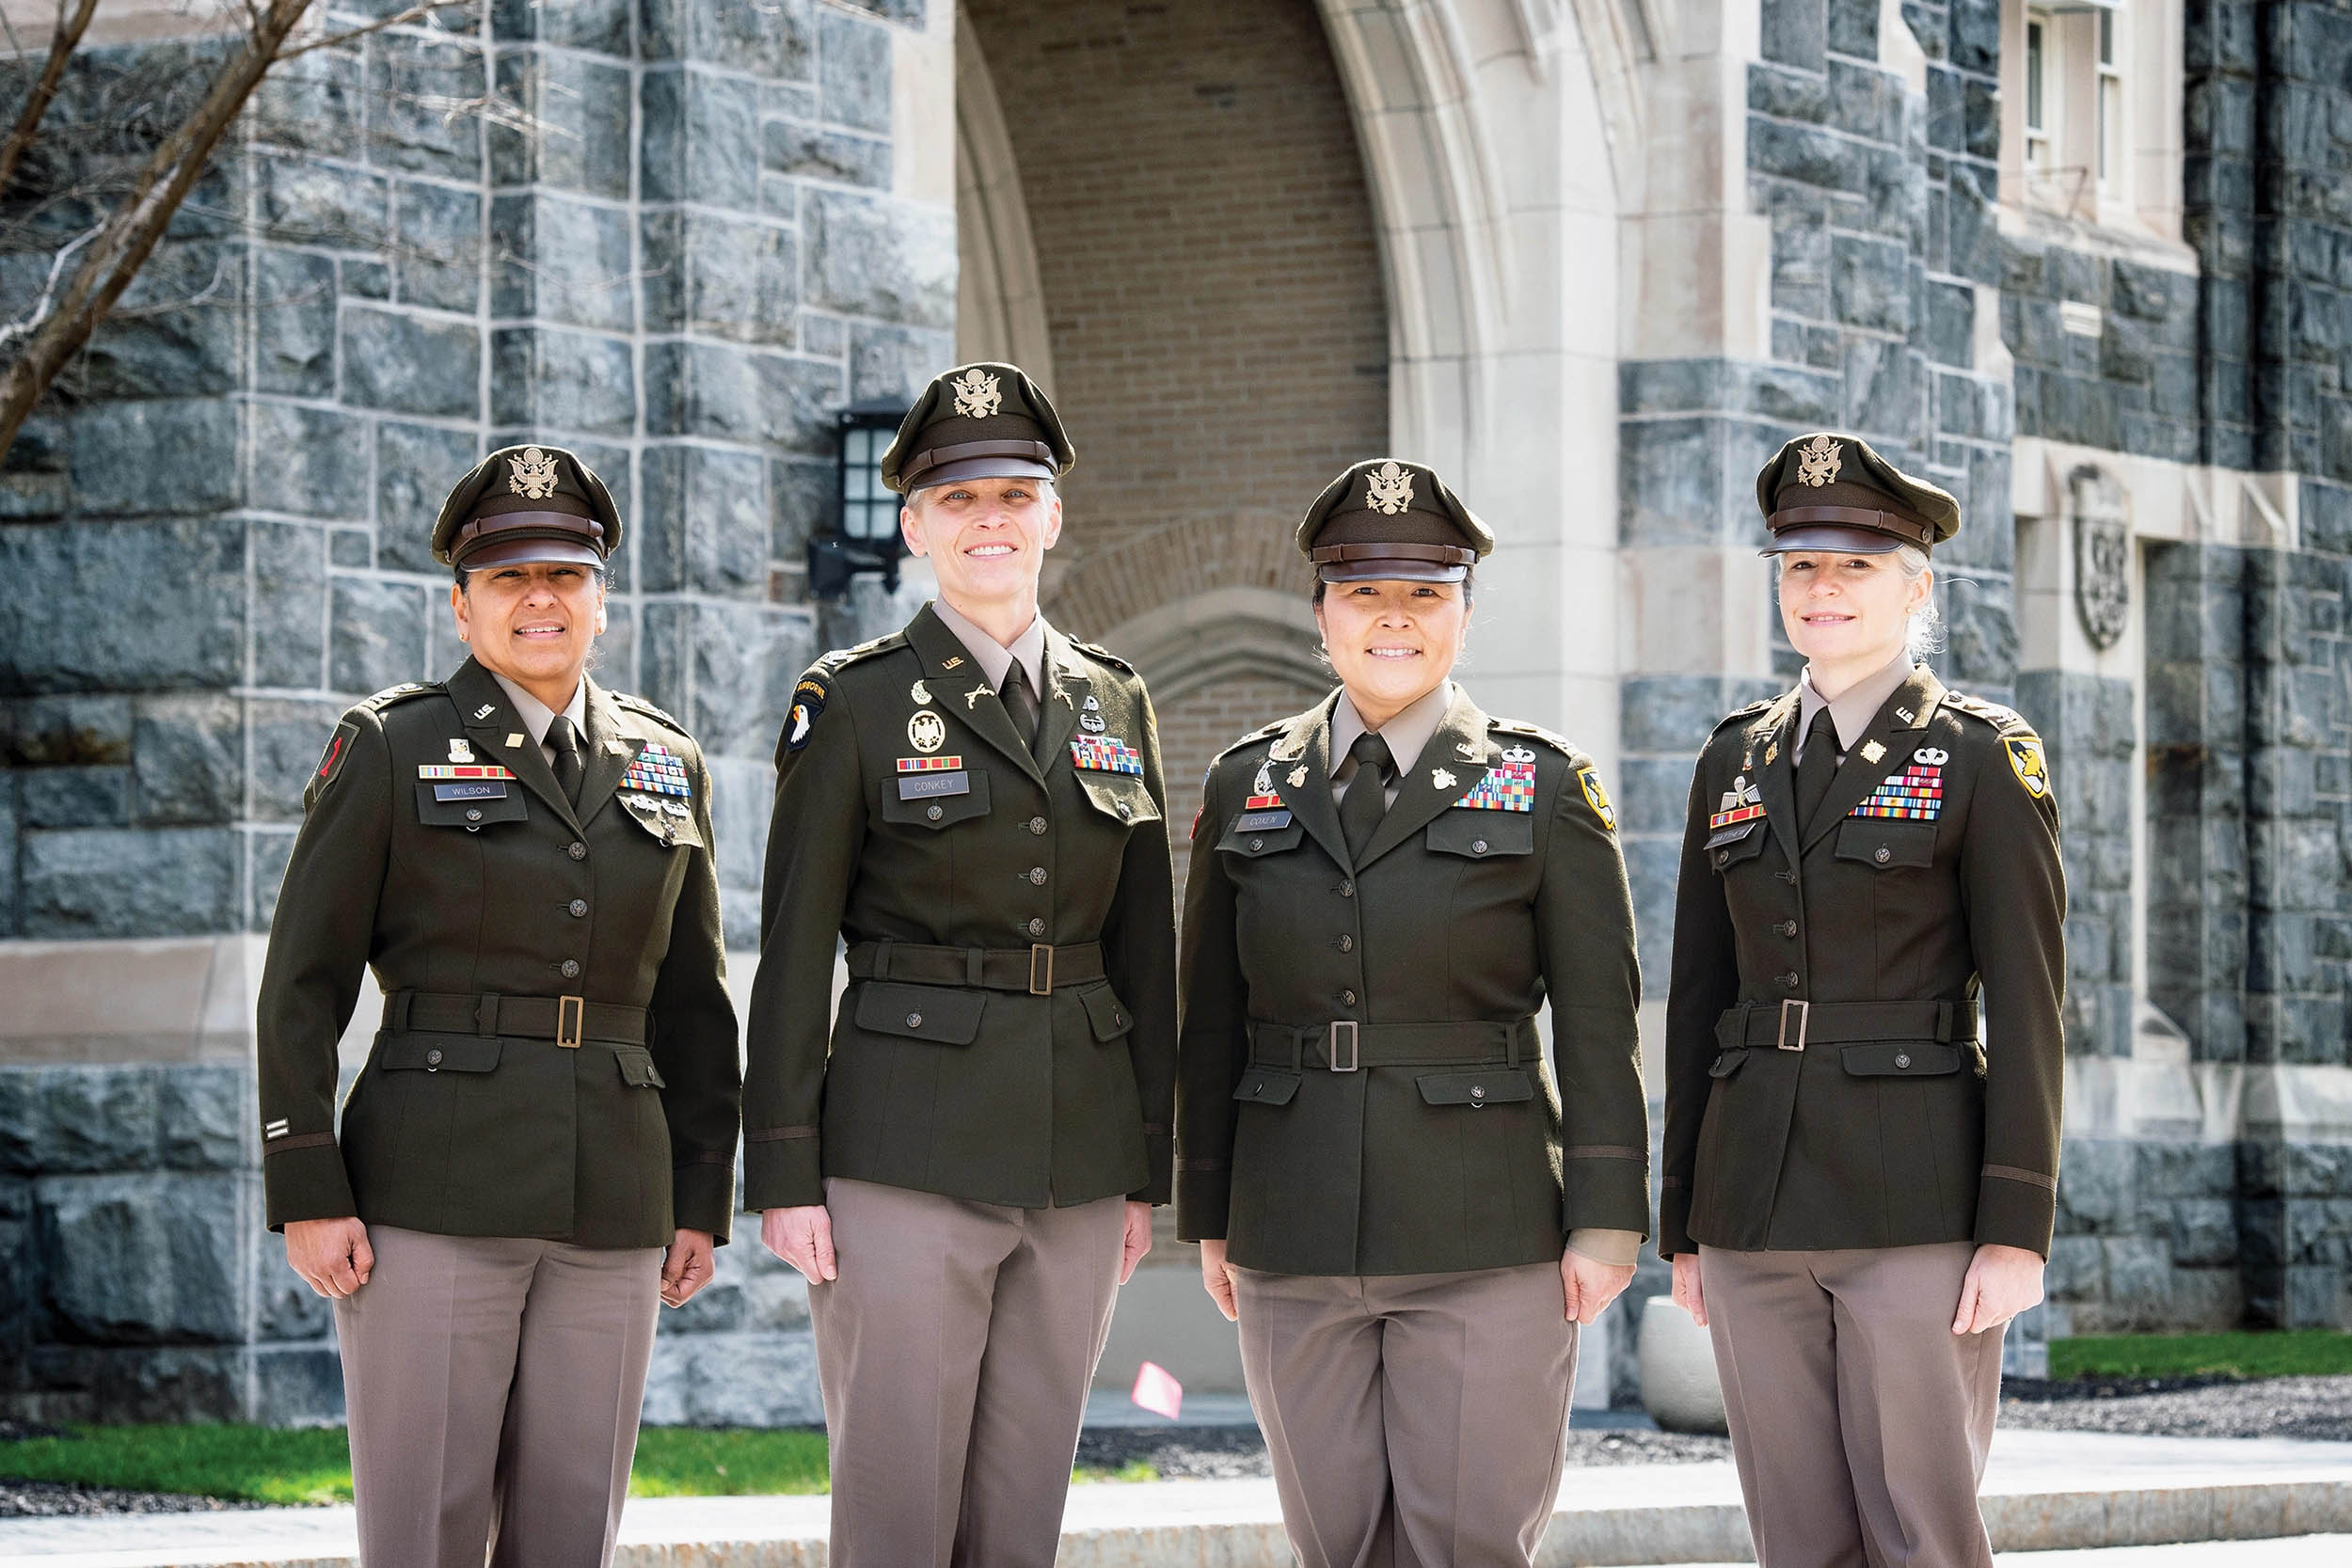 For first time in history of West Point, four current members of West Point faculty, from left, Colonels Julia Wilson, Kate Conkey, Julia Coxen, and Katie Matthew, have both commanded an Army battalion and earned a Ph.D., U.S. Military Academy at West Point, New York, March 27, 2023 (U.S. Army/Elizabeth Woodruff)